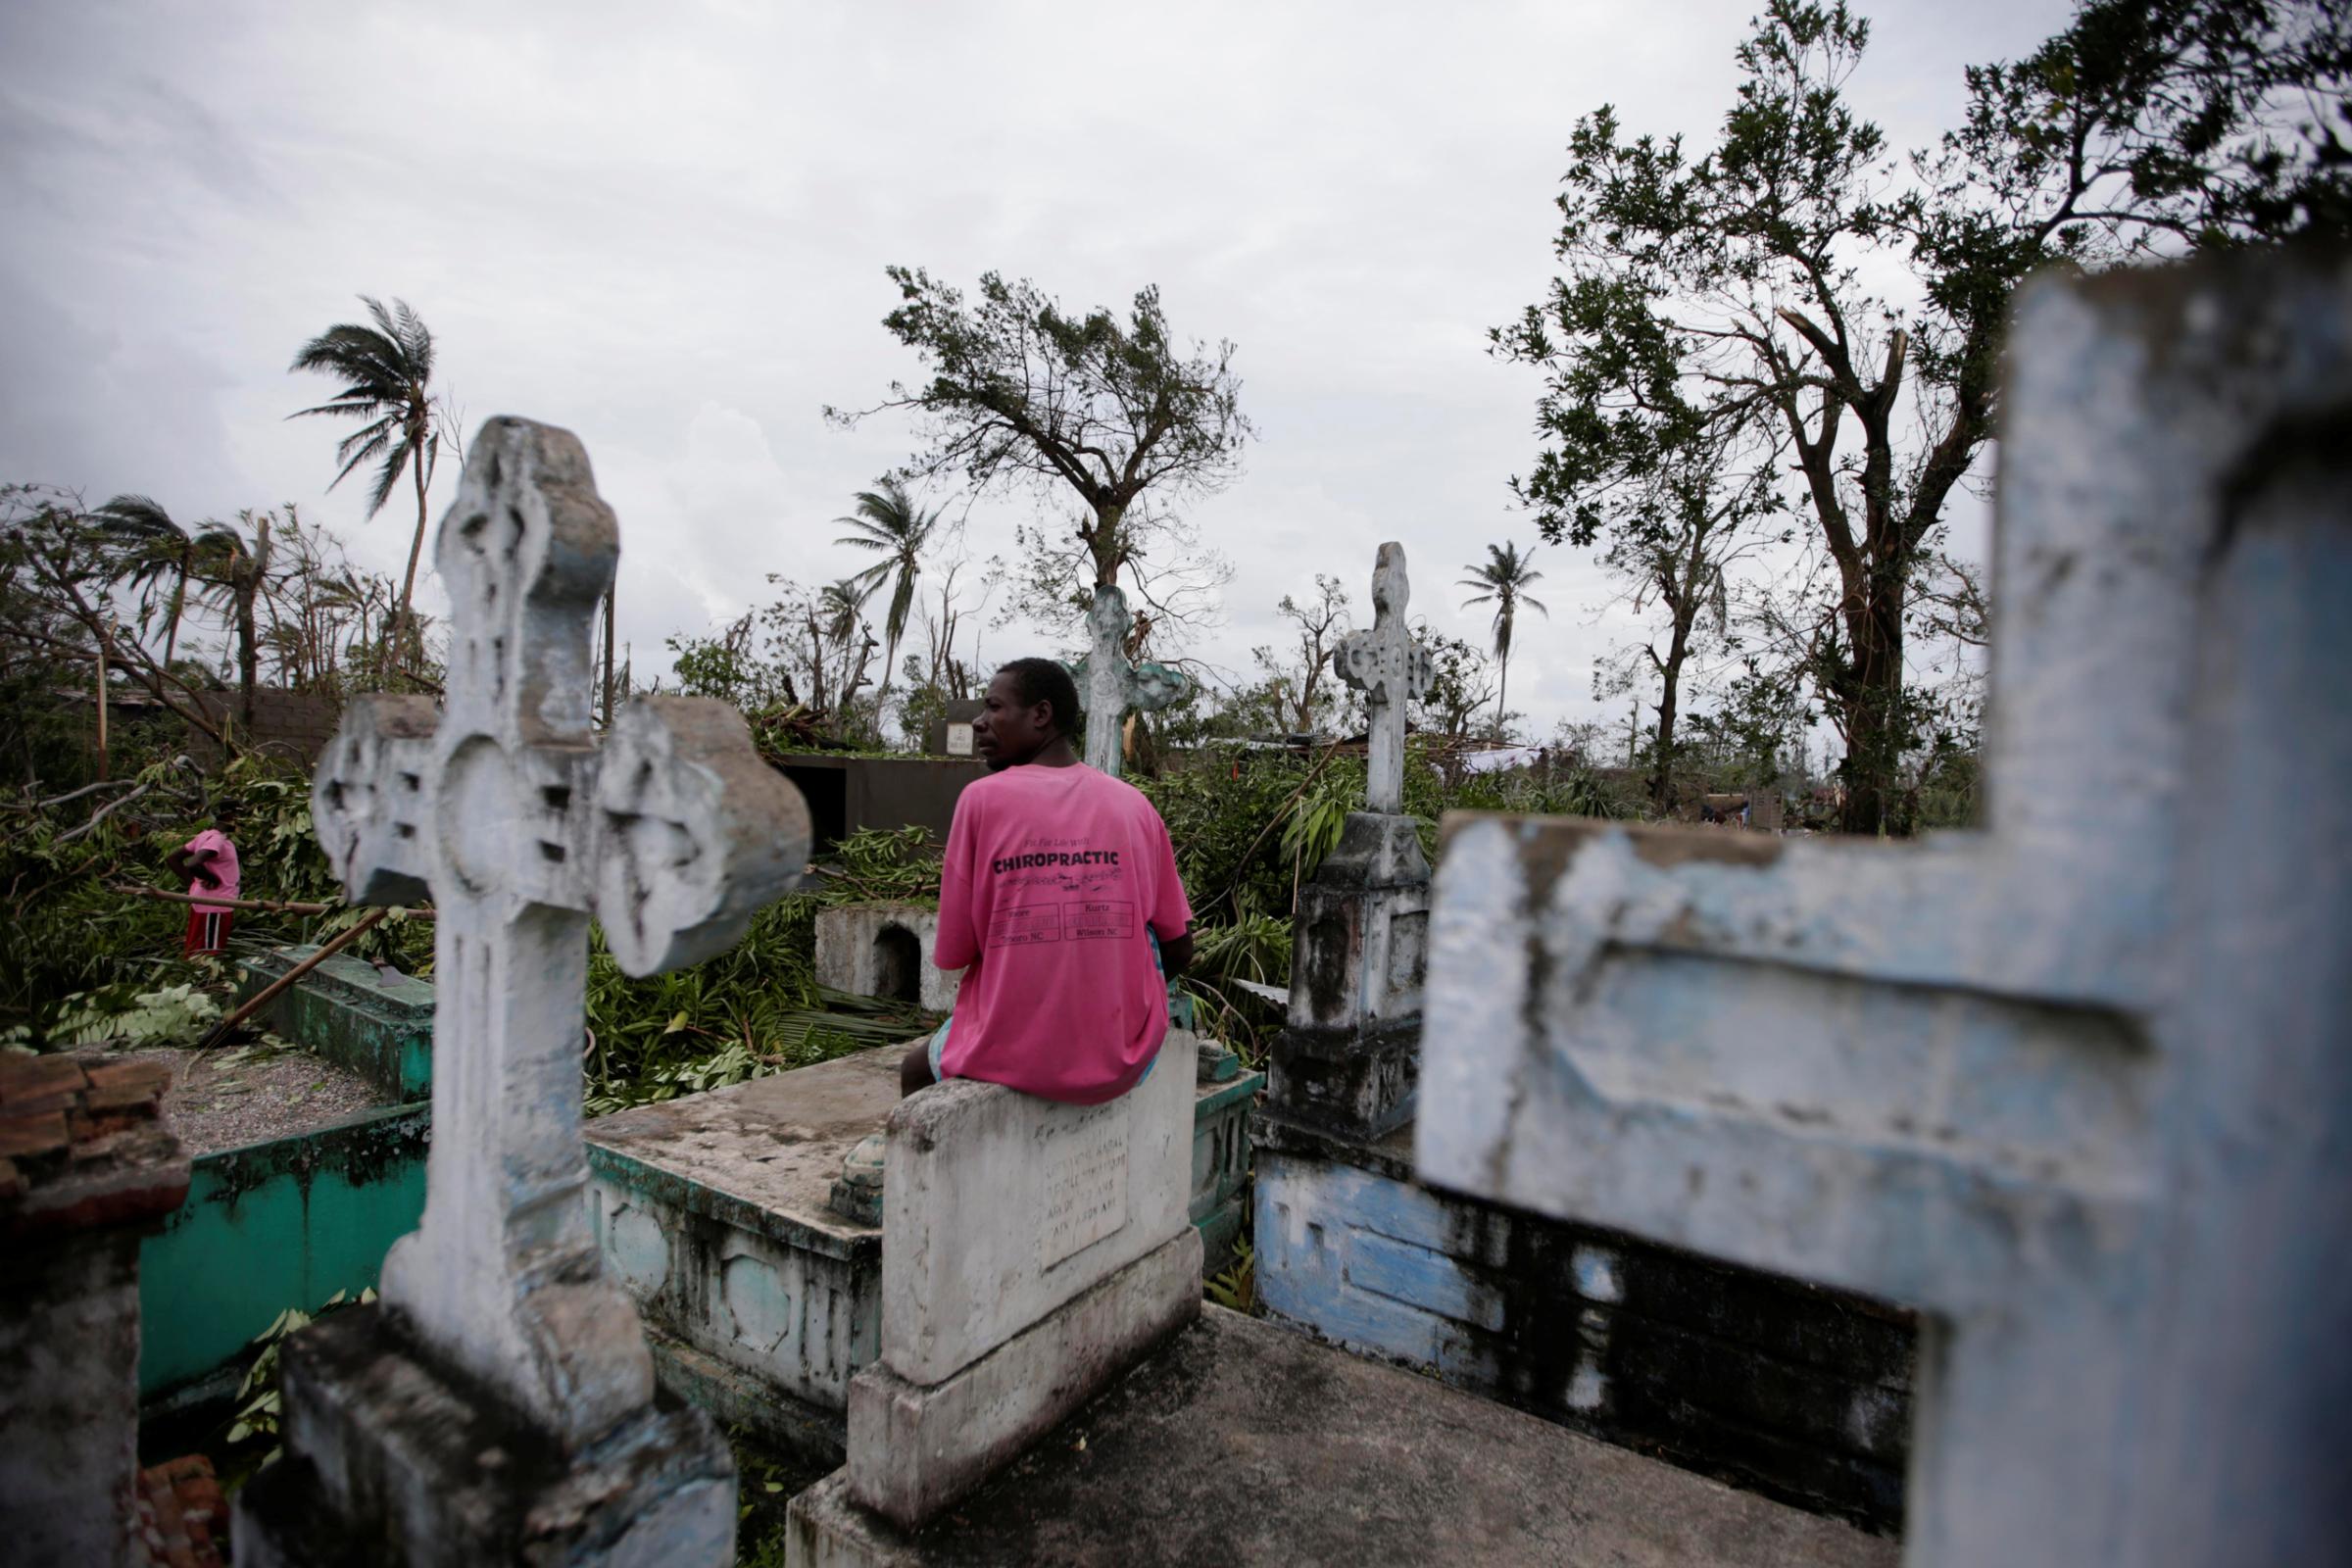 A man sits on a tombstone as he watches other clearing trees after Hurricane Matthew in Les Cayes, Haiti, October 6, 2016. REUTERS/Andres Martinez Casares - RTSR31K